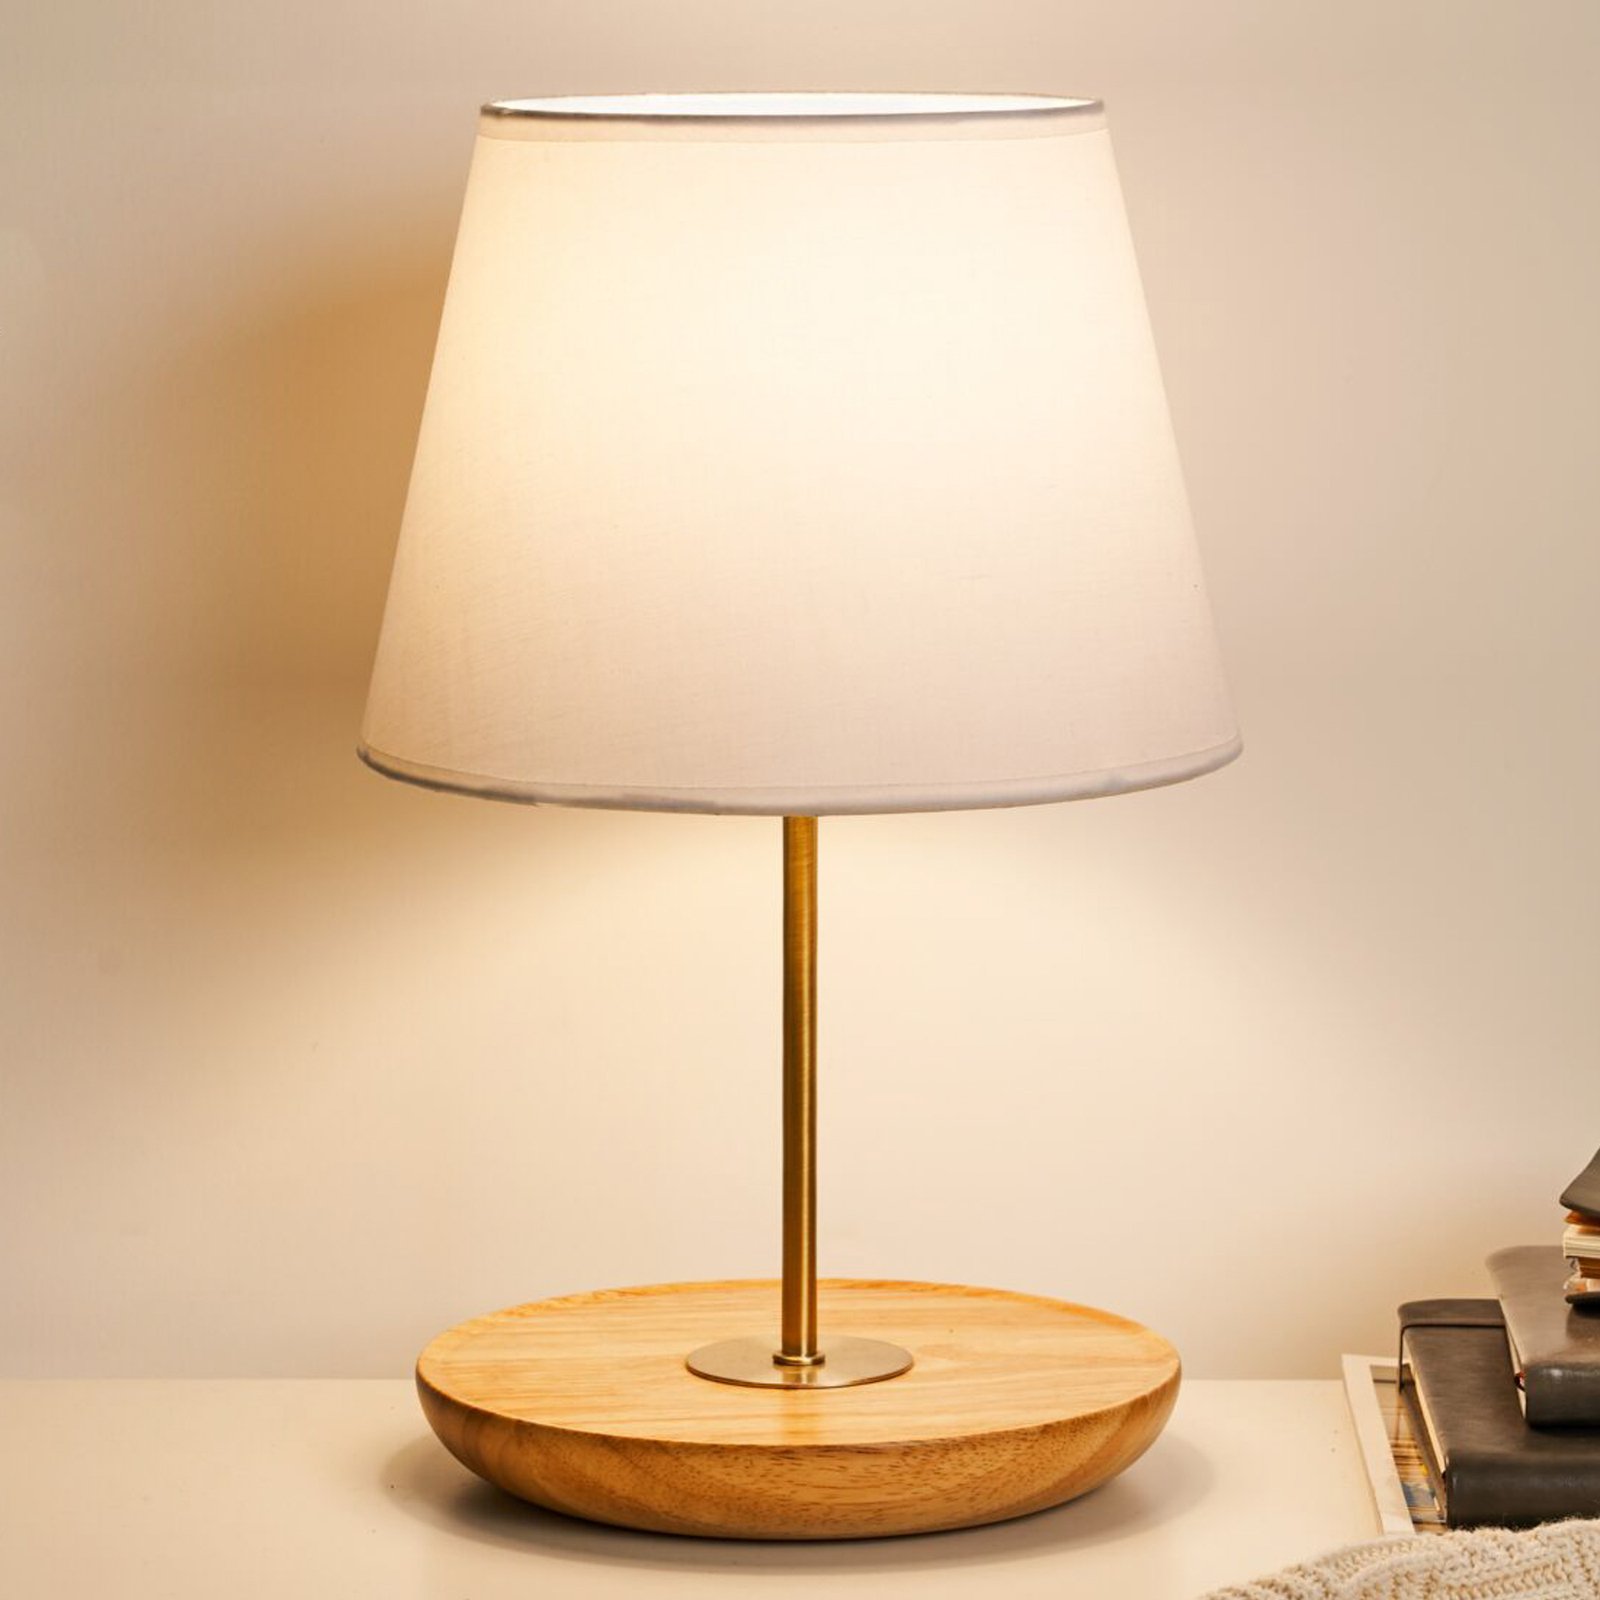 Pauleen Woody Heart table lamp with a wooden base